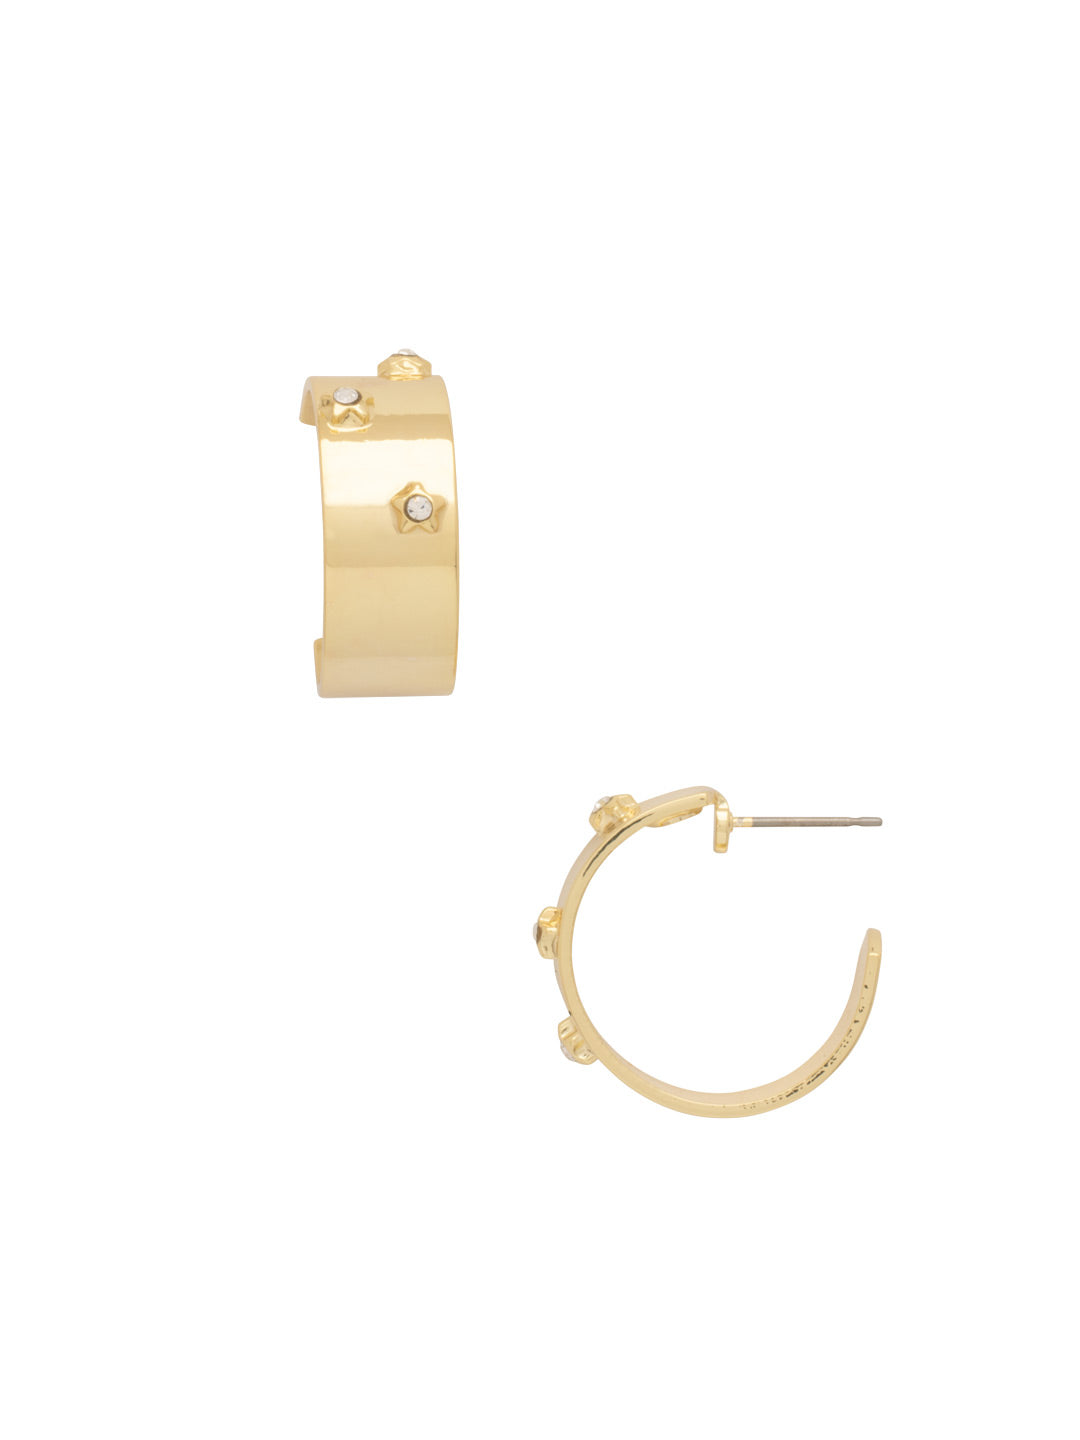 Star Studded Hoop Earrings - EFM10BGCRY - <p>The Star-Studded Hoop Earrings feature a chunky metal hoop with crystal star embellishments From Sorrelli's Crystal collection in our Bright Gold-tone finish.</p>